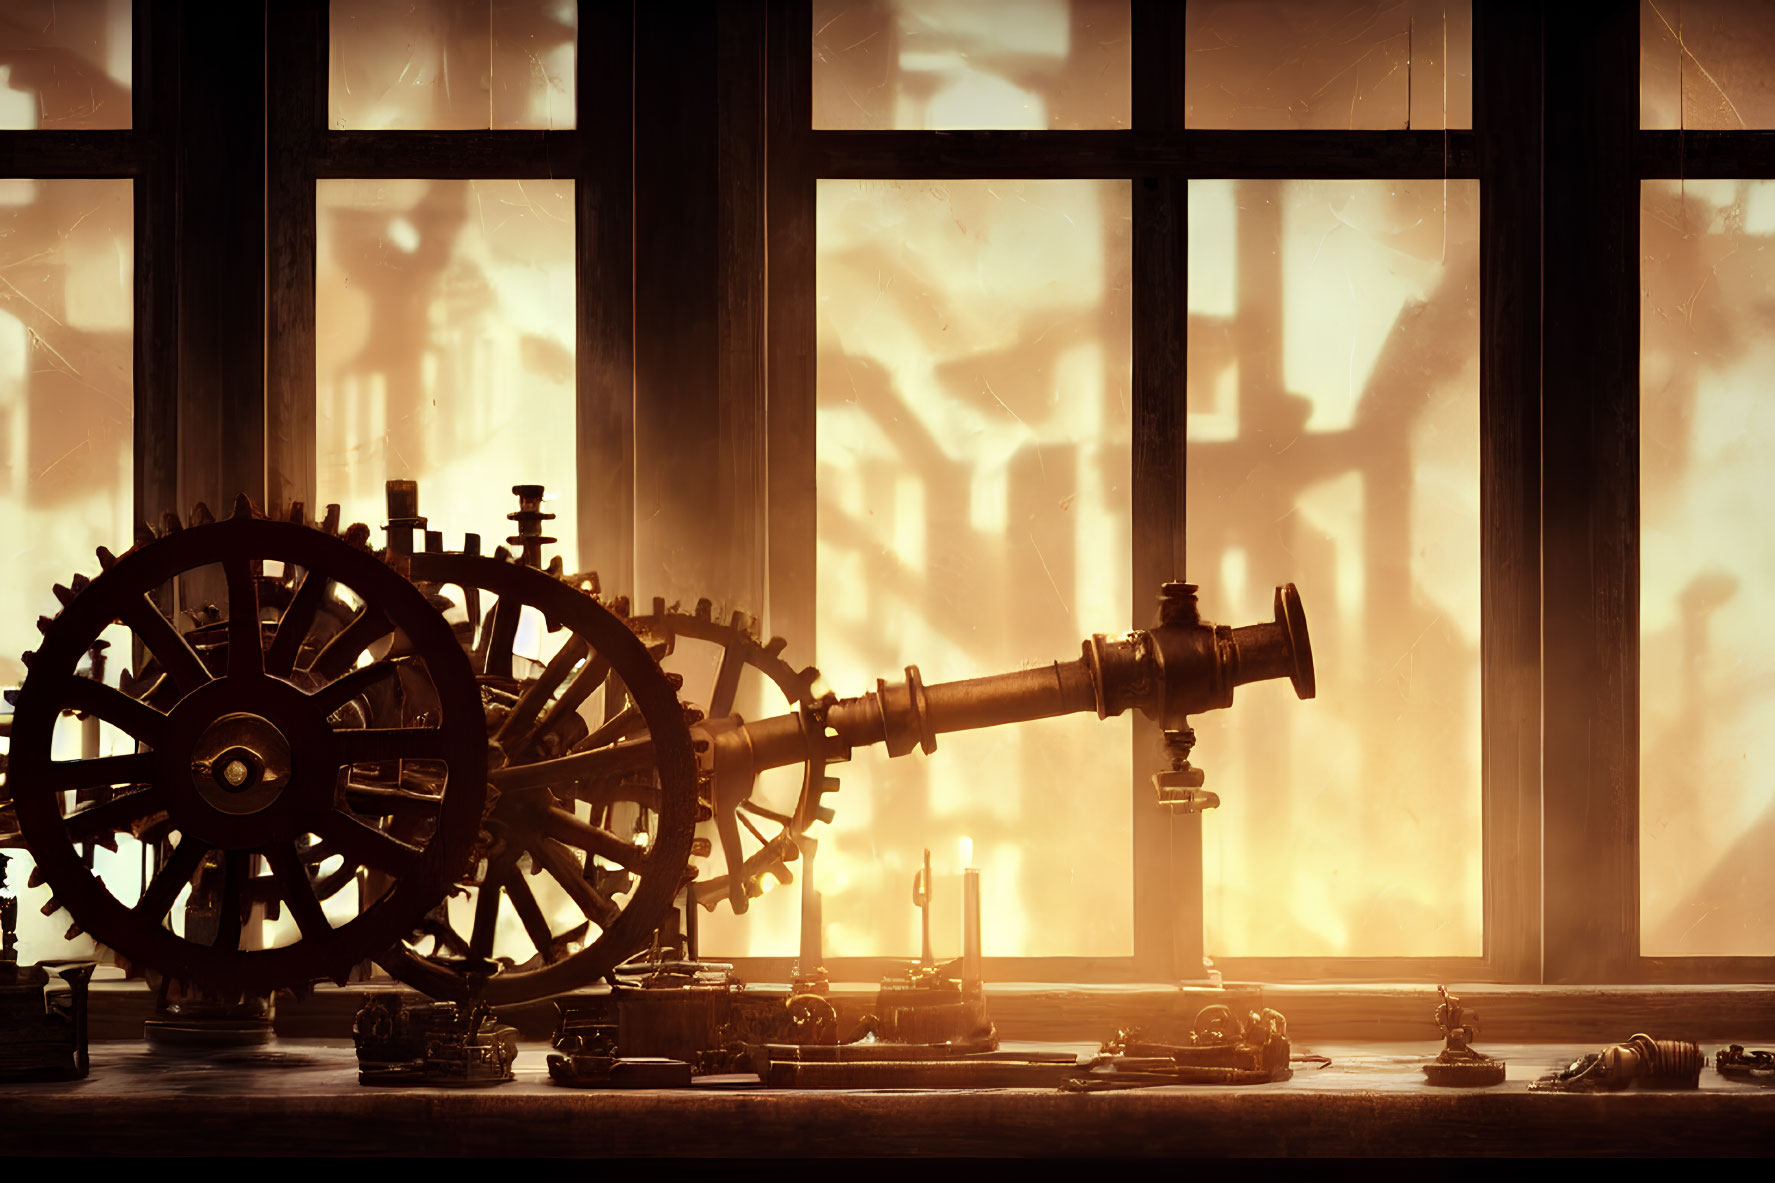 Vintage Machinery with Gears and Telescope on Wooden Table in Warm Backlight